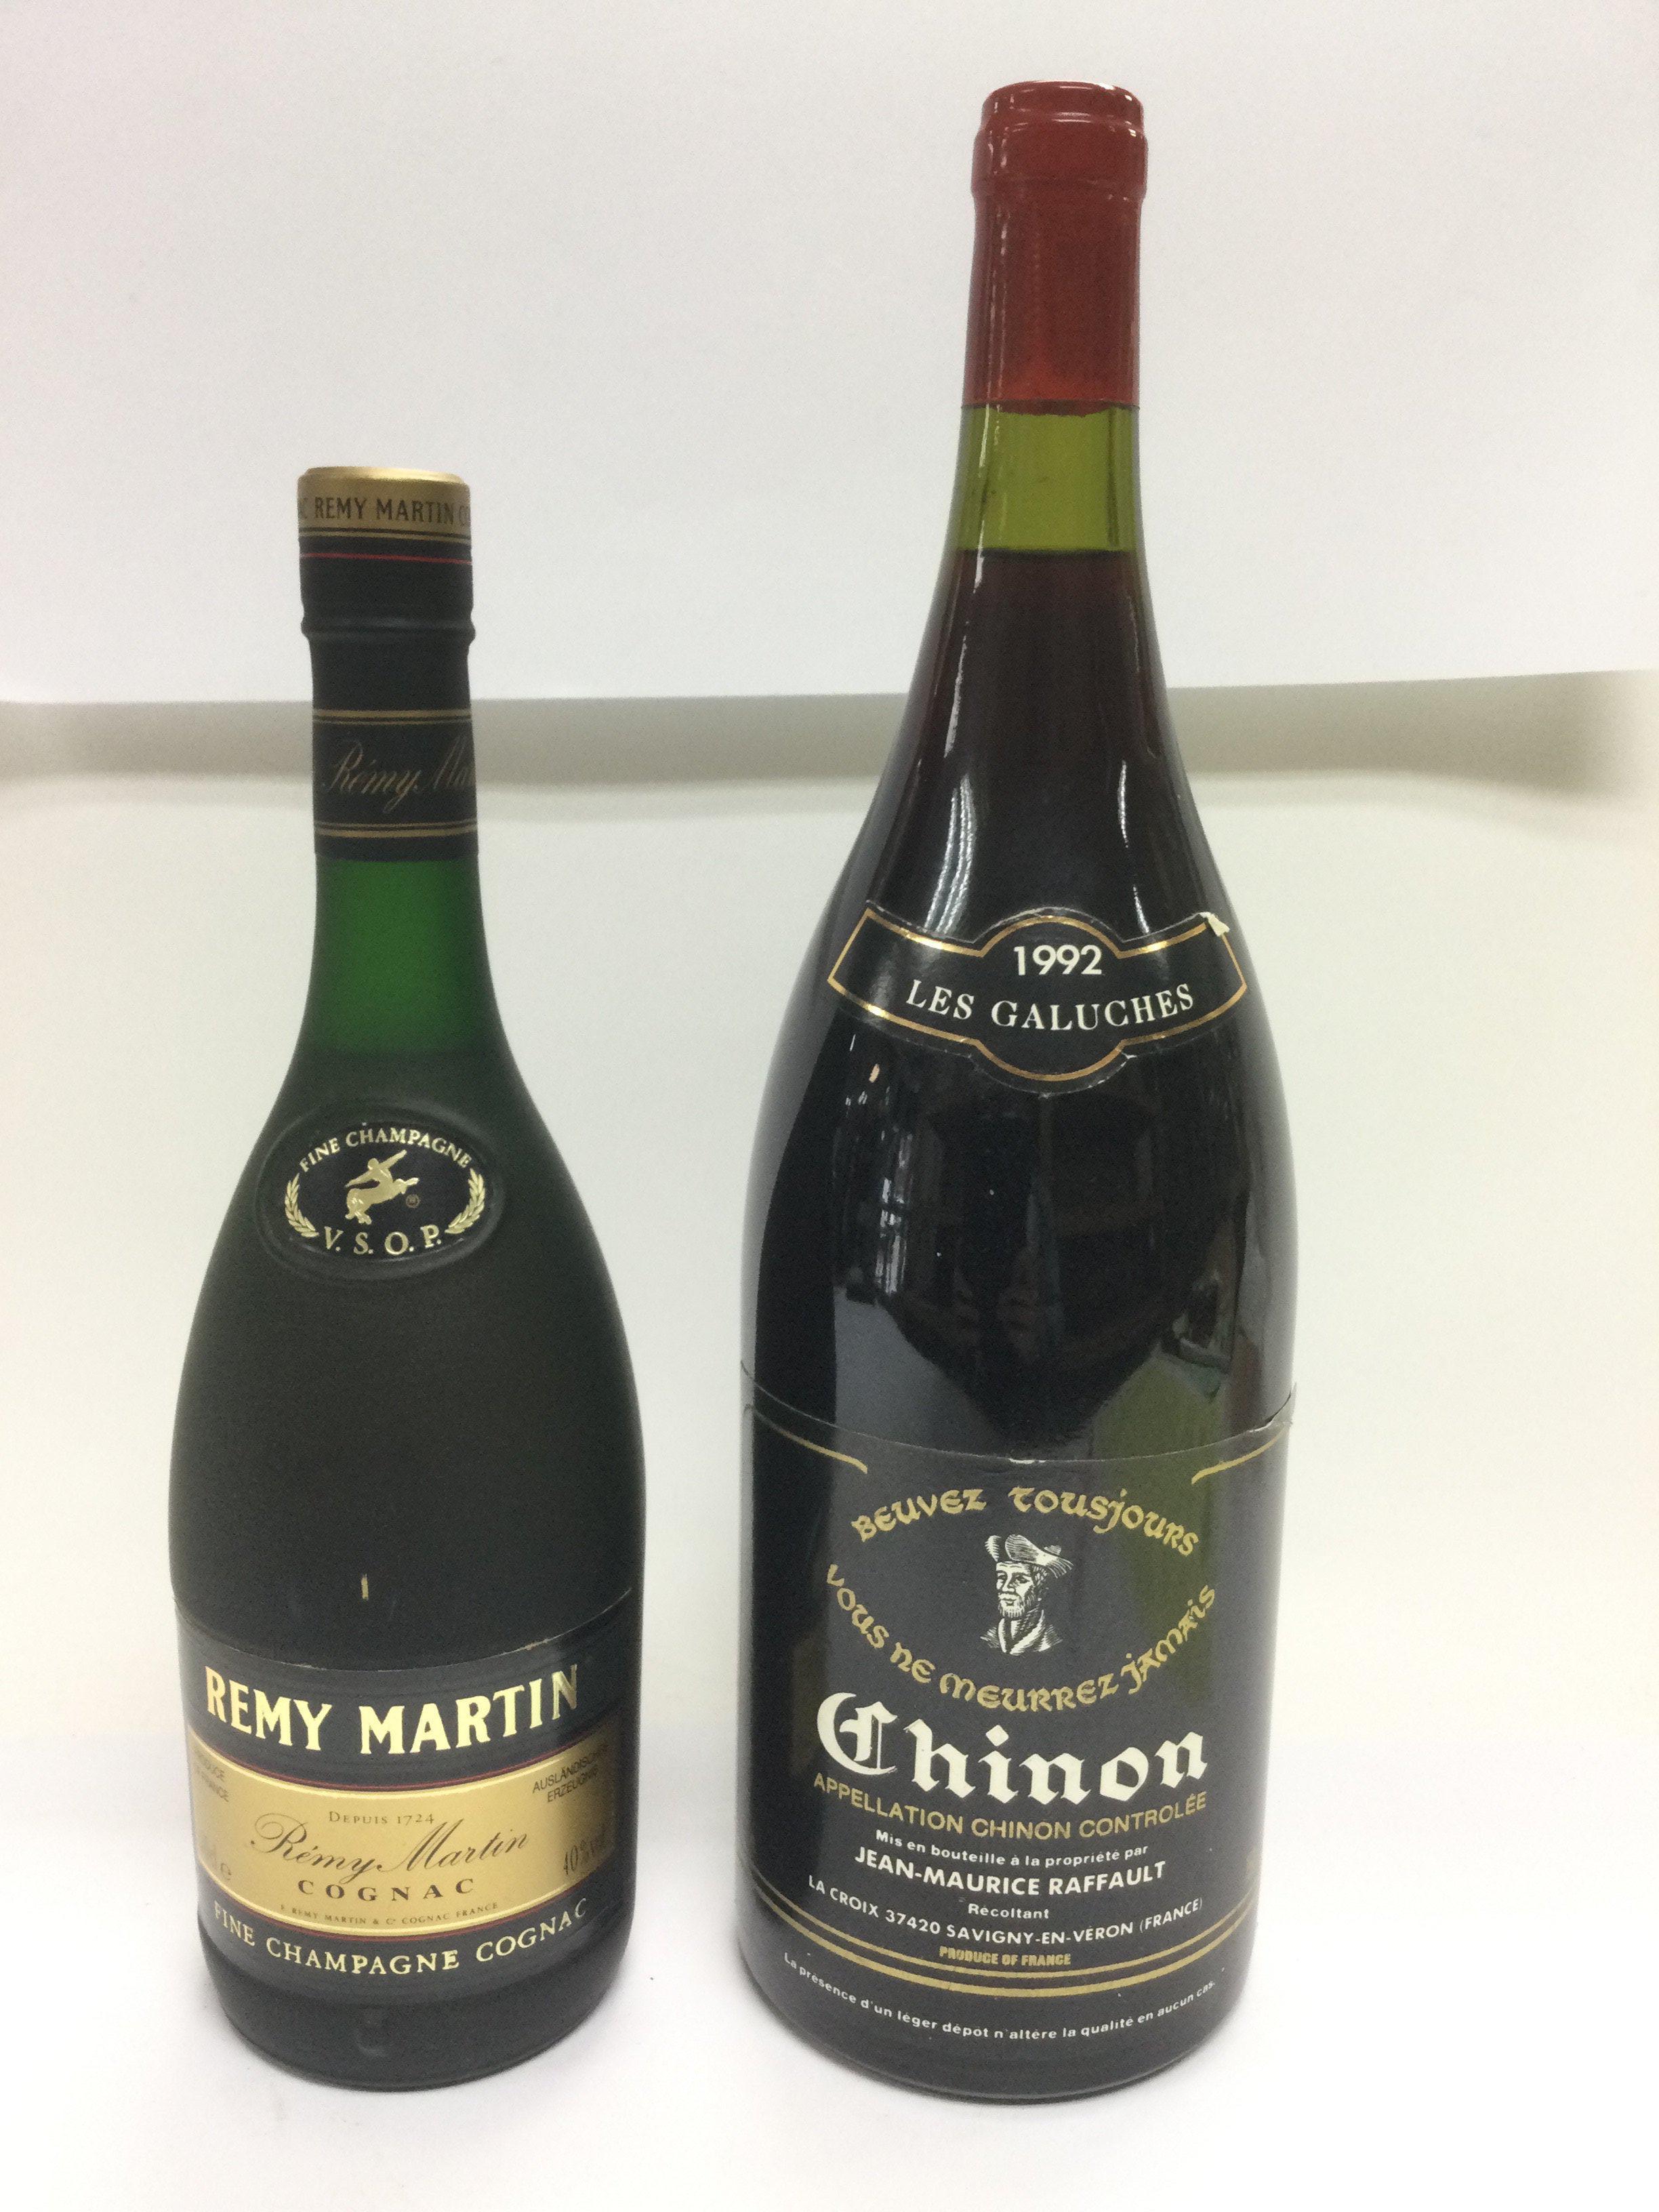 A large bottle of 1992 Chinon red wine and a 70cl